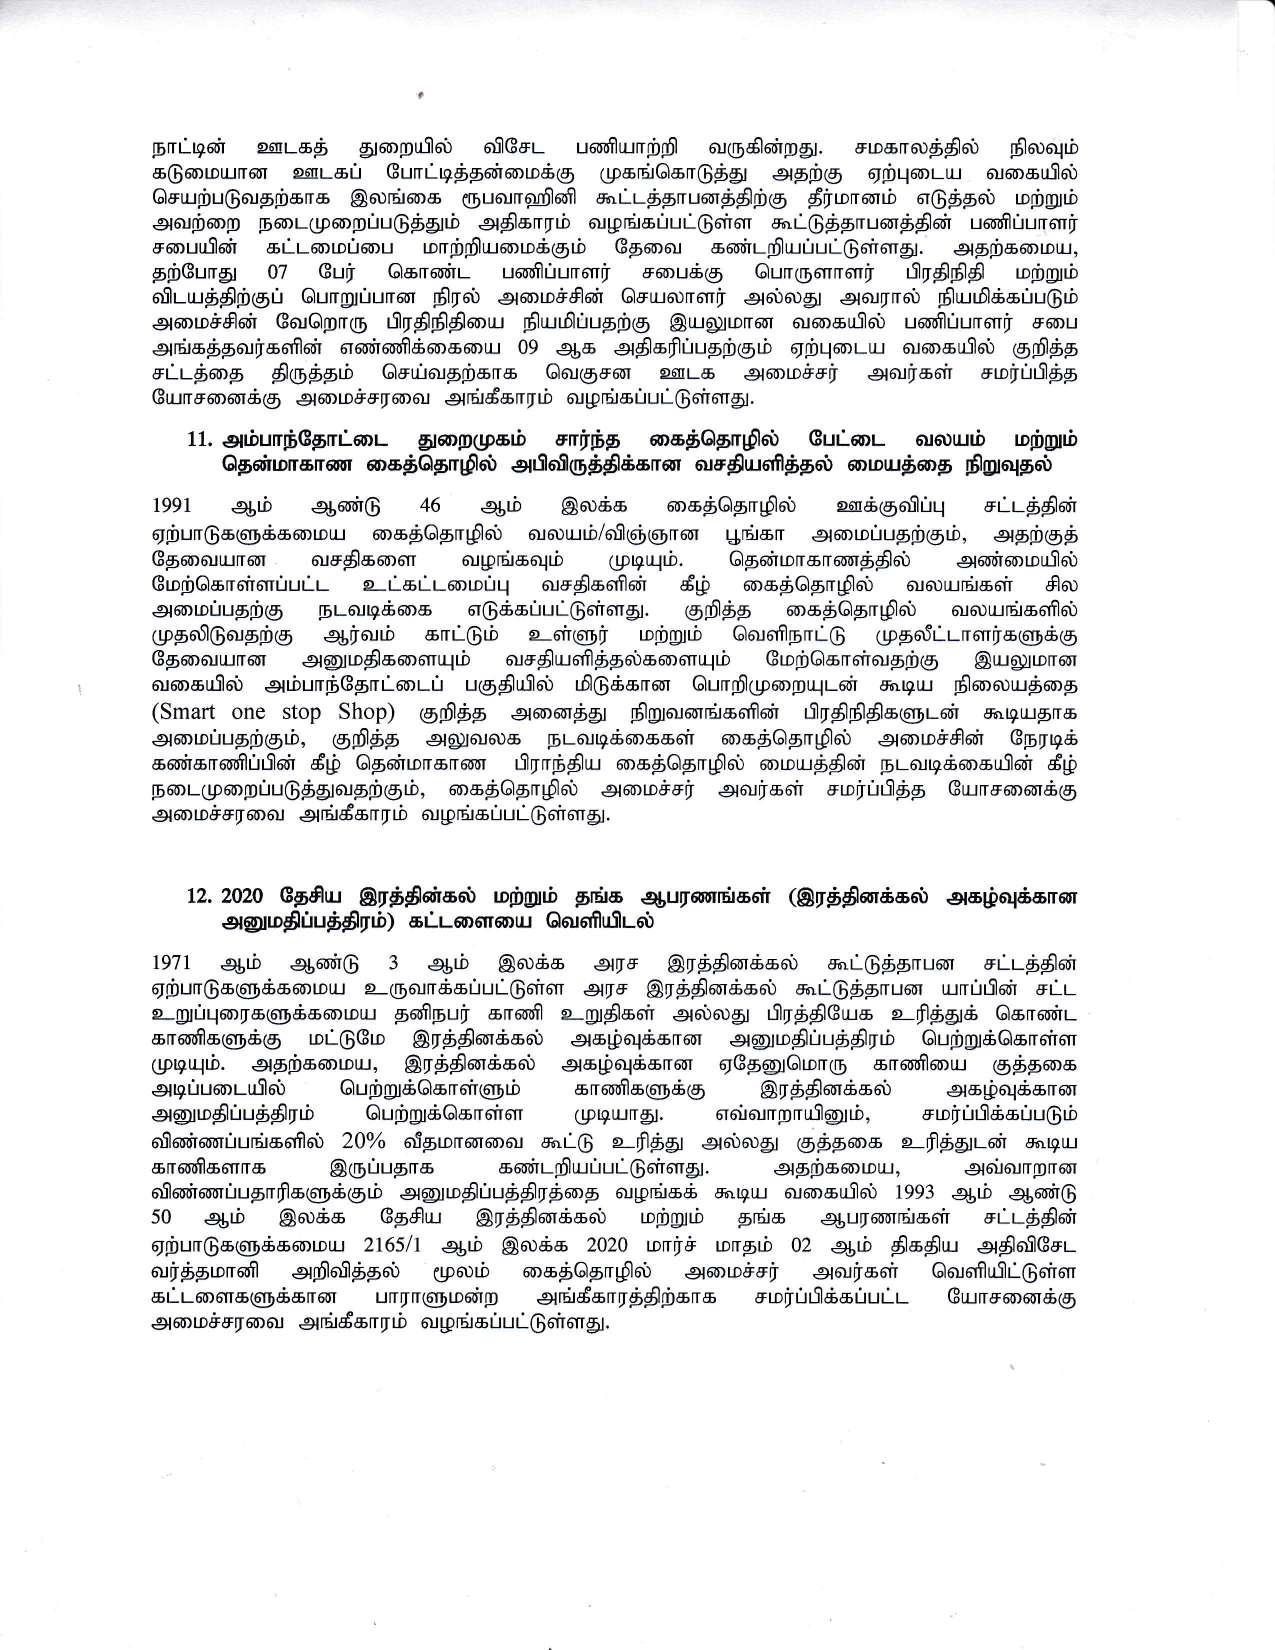 Cabinet Decision on 04.01.2021 Tamil page 004